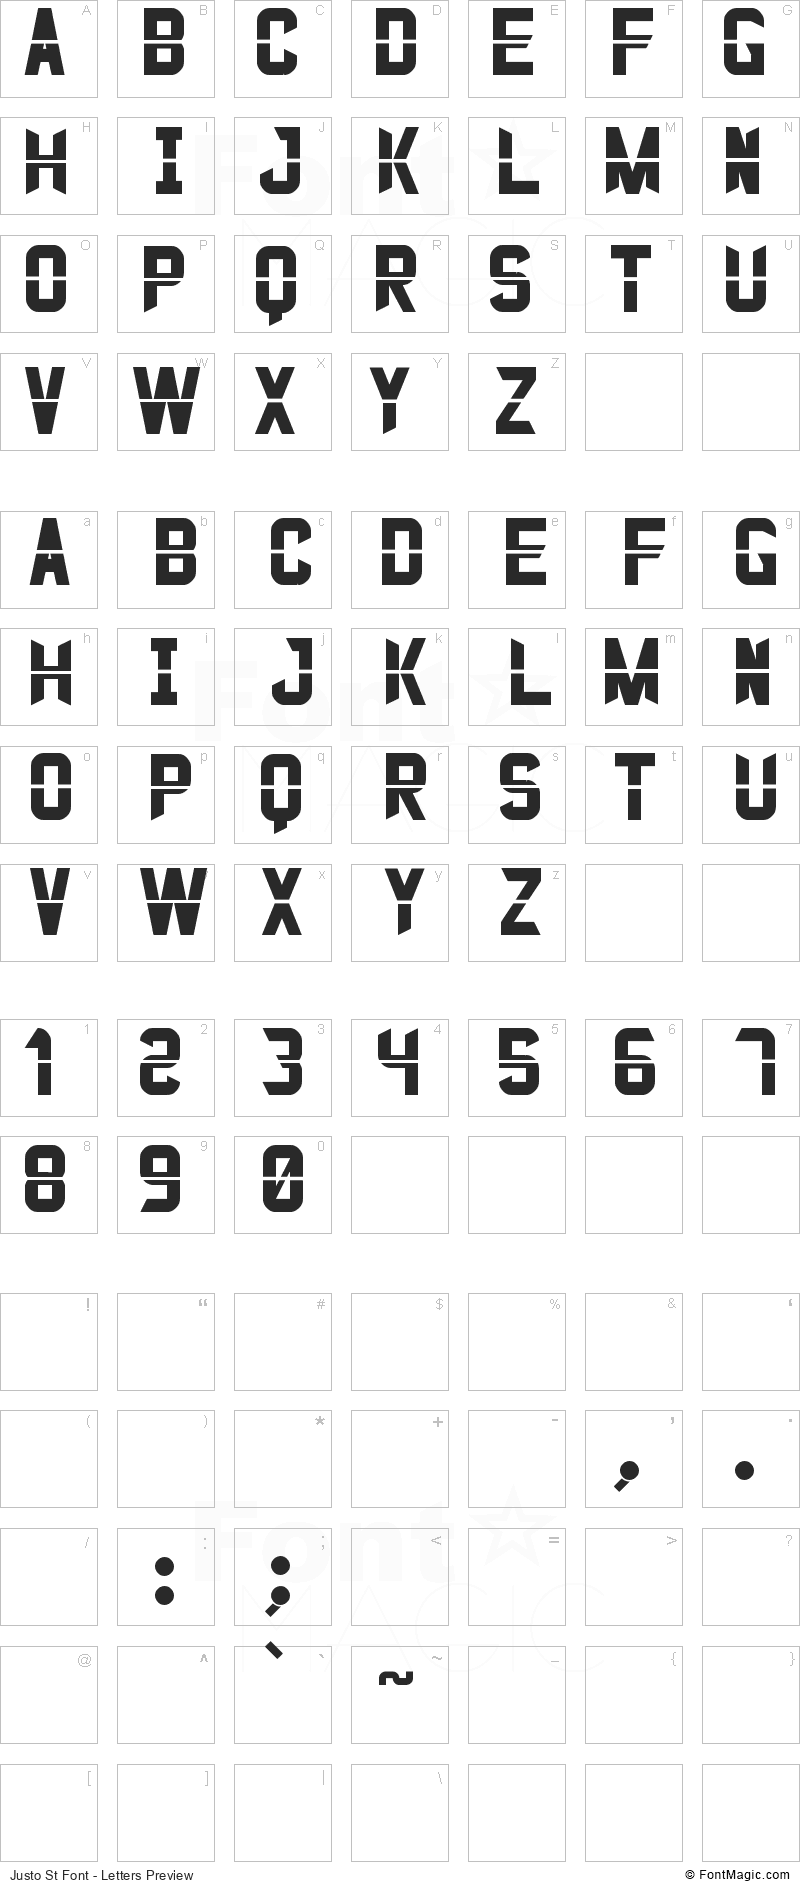 Justo St Font - All Latters Preview Chart